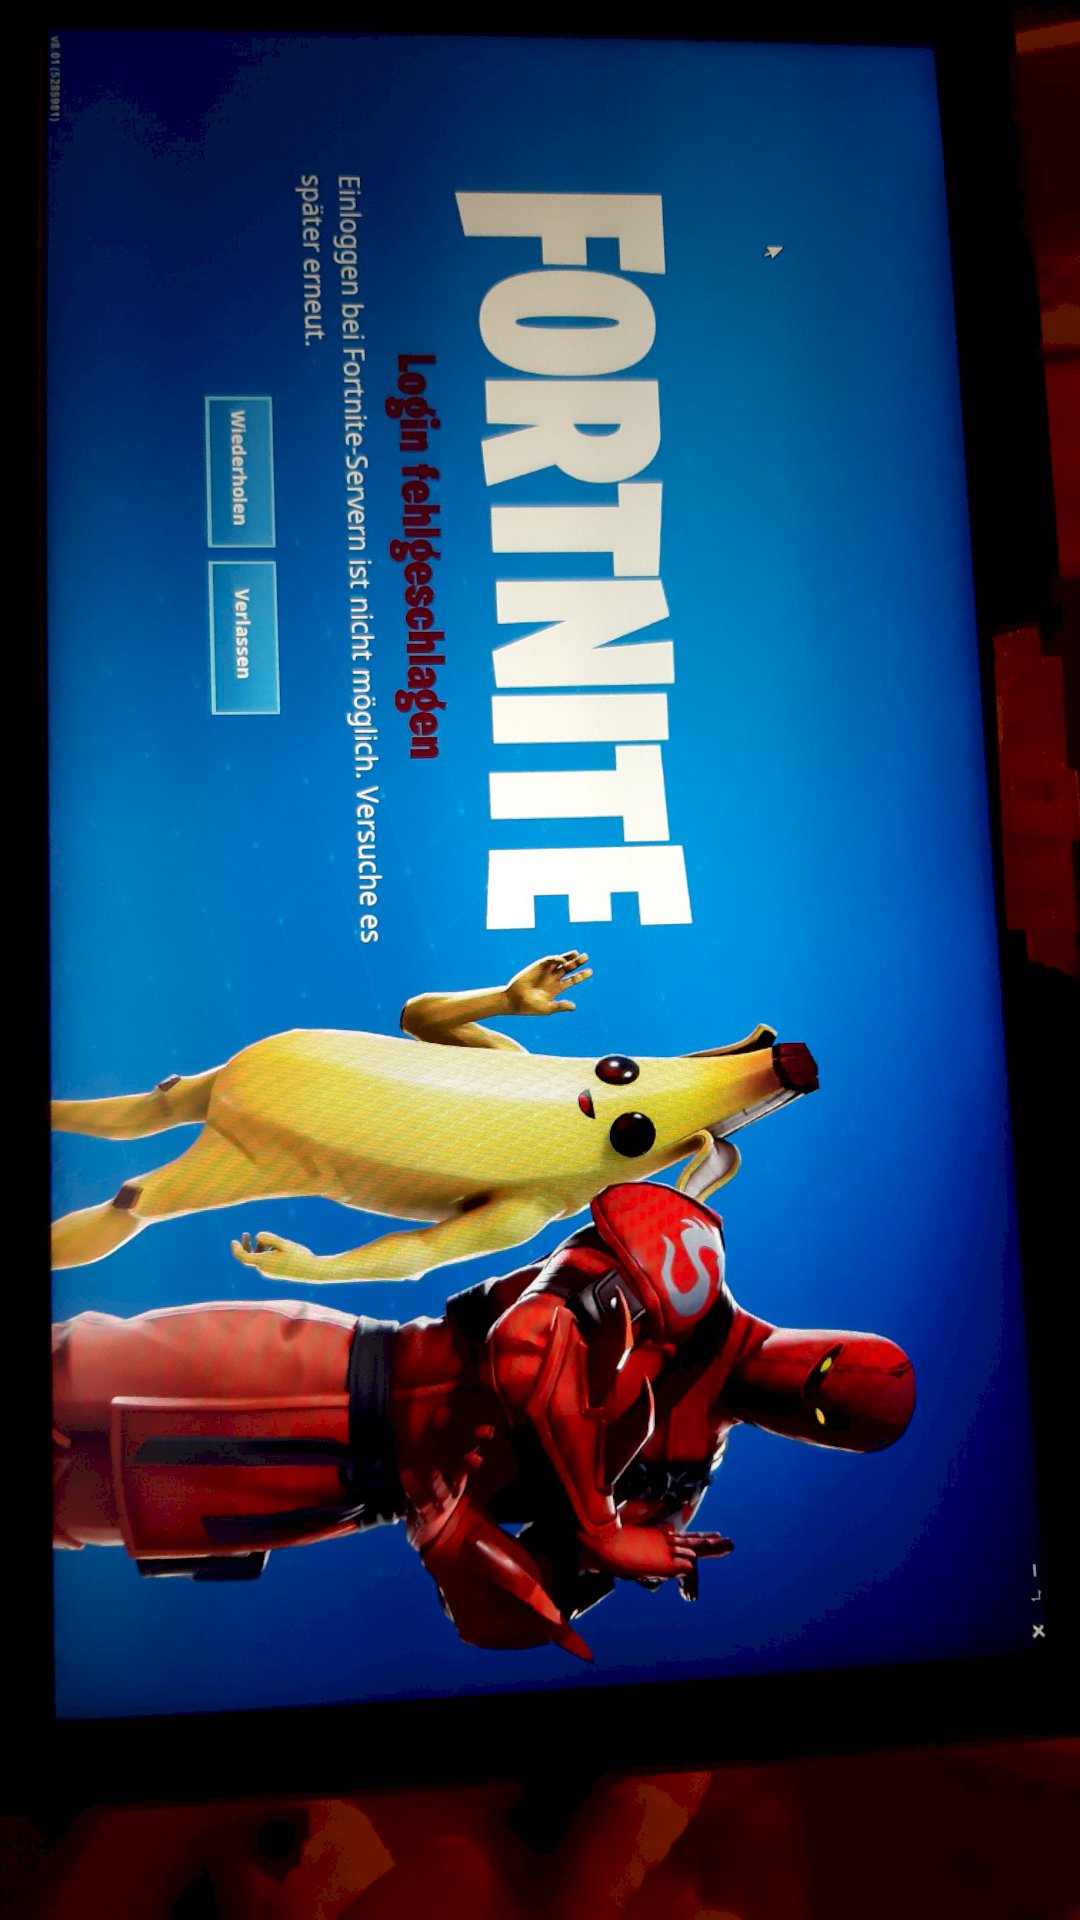 Login to the fortnite servers not possible on pc what to do